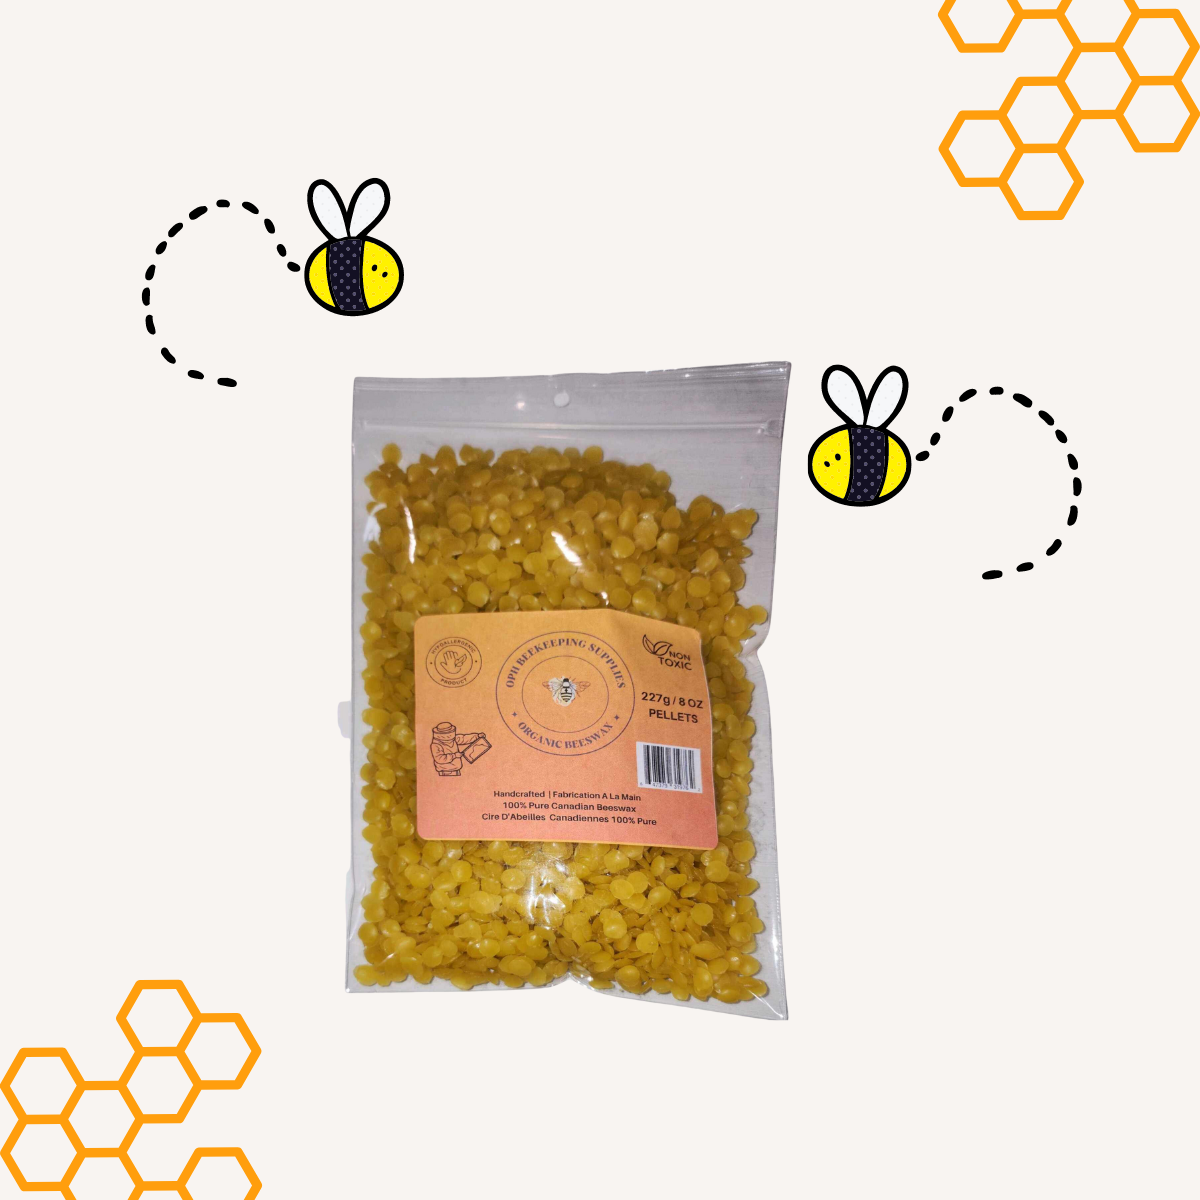 Organic Yellow Beeswax Pellets 1 lb, Pure, Natural, Cosmetic Grade Bees wax,  Triple Filtered, Great For Diy Lip Balm, Lotions and More 16 oz - White  Naturals